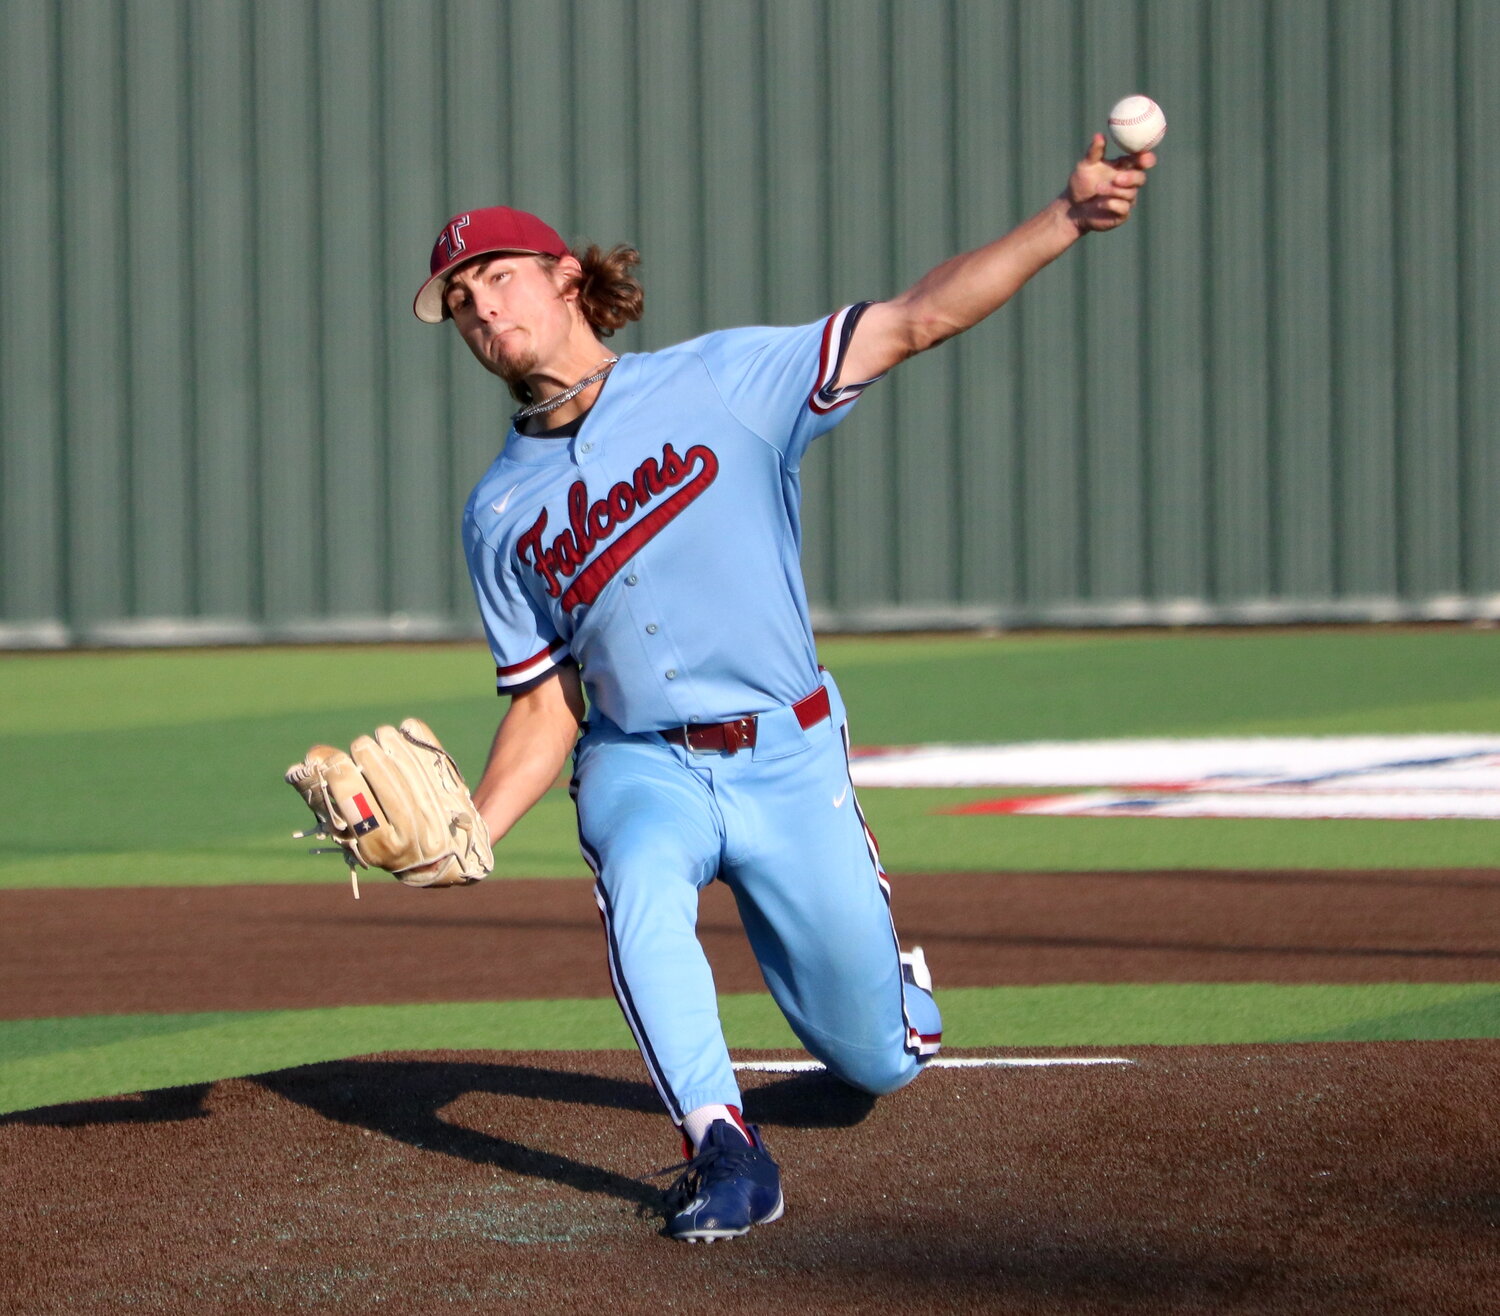 Ty Dagley pitches during Thursday's Regional Quarterfinal game between Katy and Tompkins at Cy-Springs.